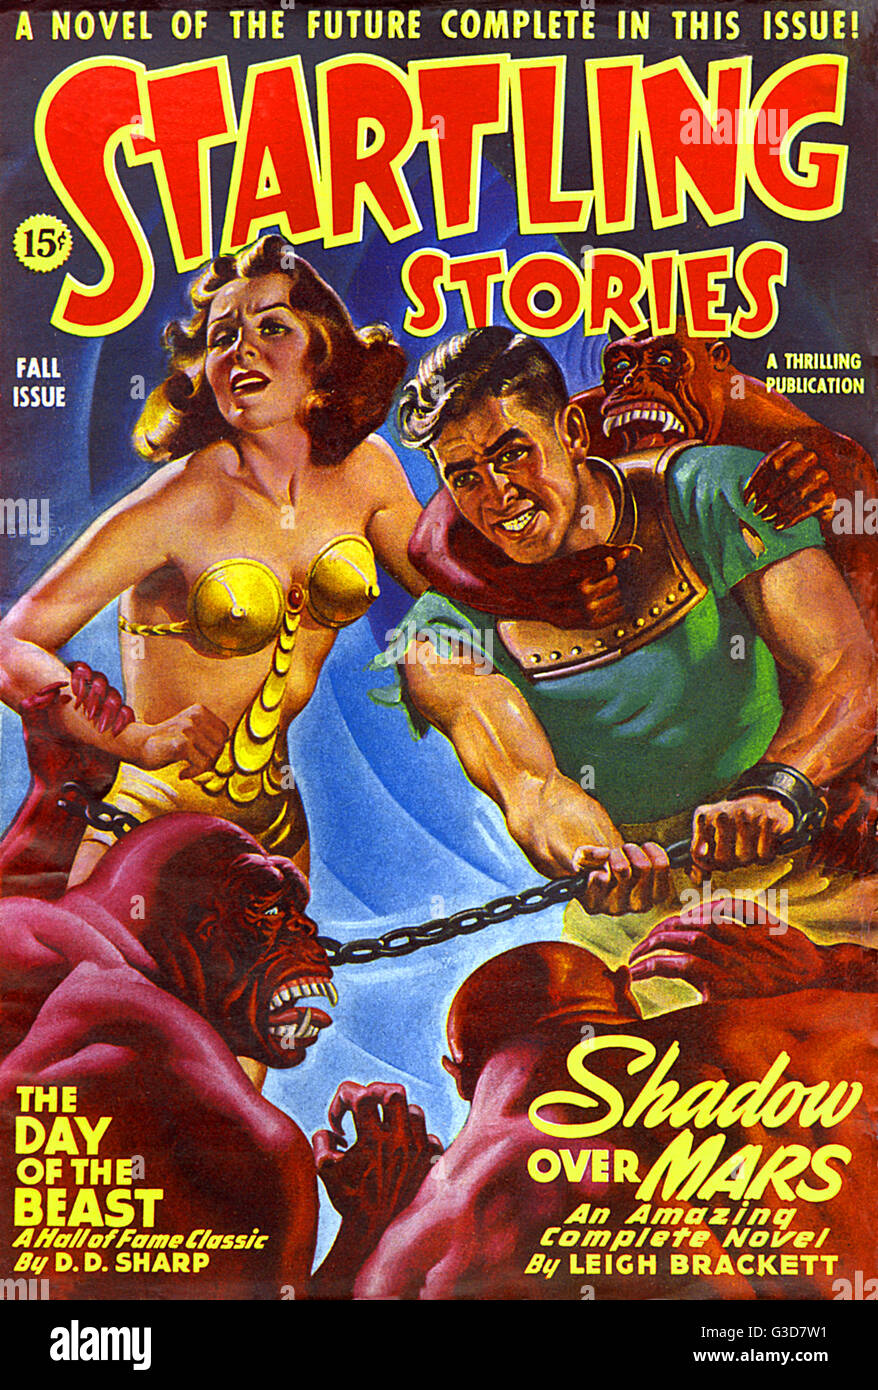 Startling Stories - Sci Fi Mag - Shadow Over Mars Stock Photo